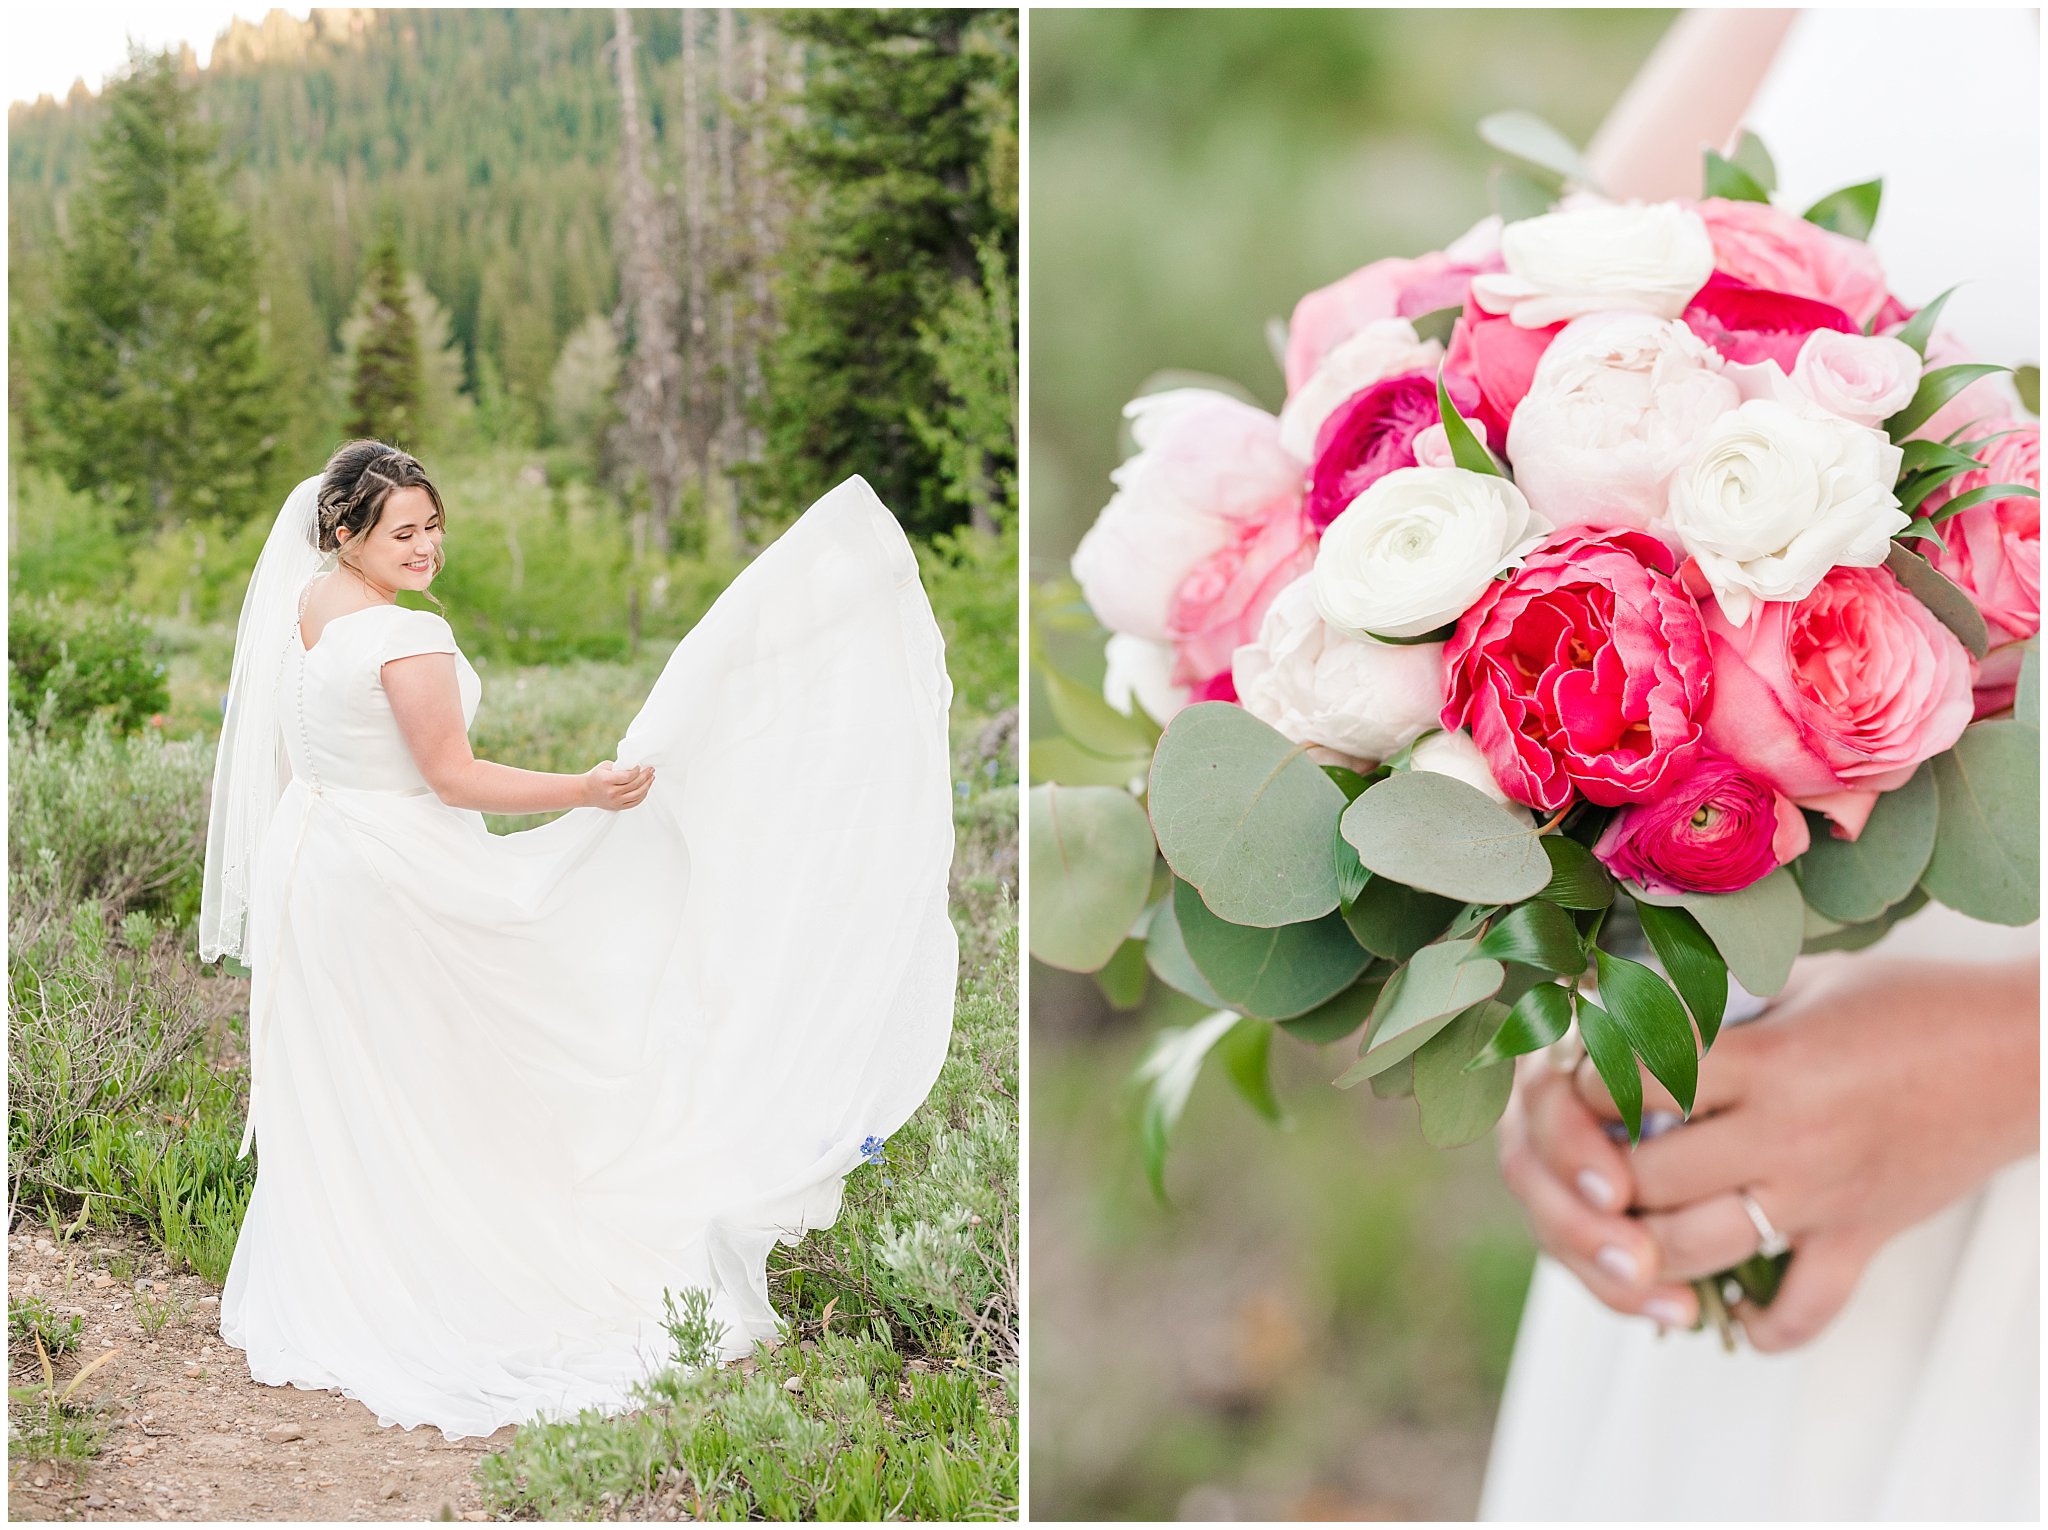 Bridal portrait in the Utah mountains wearing flowy wedding dress with pink and white florals | Summer Mountain wildflowers | Tony Grove Summer Formal Session | Jessie and Dallin Photography